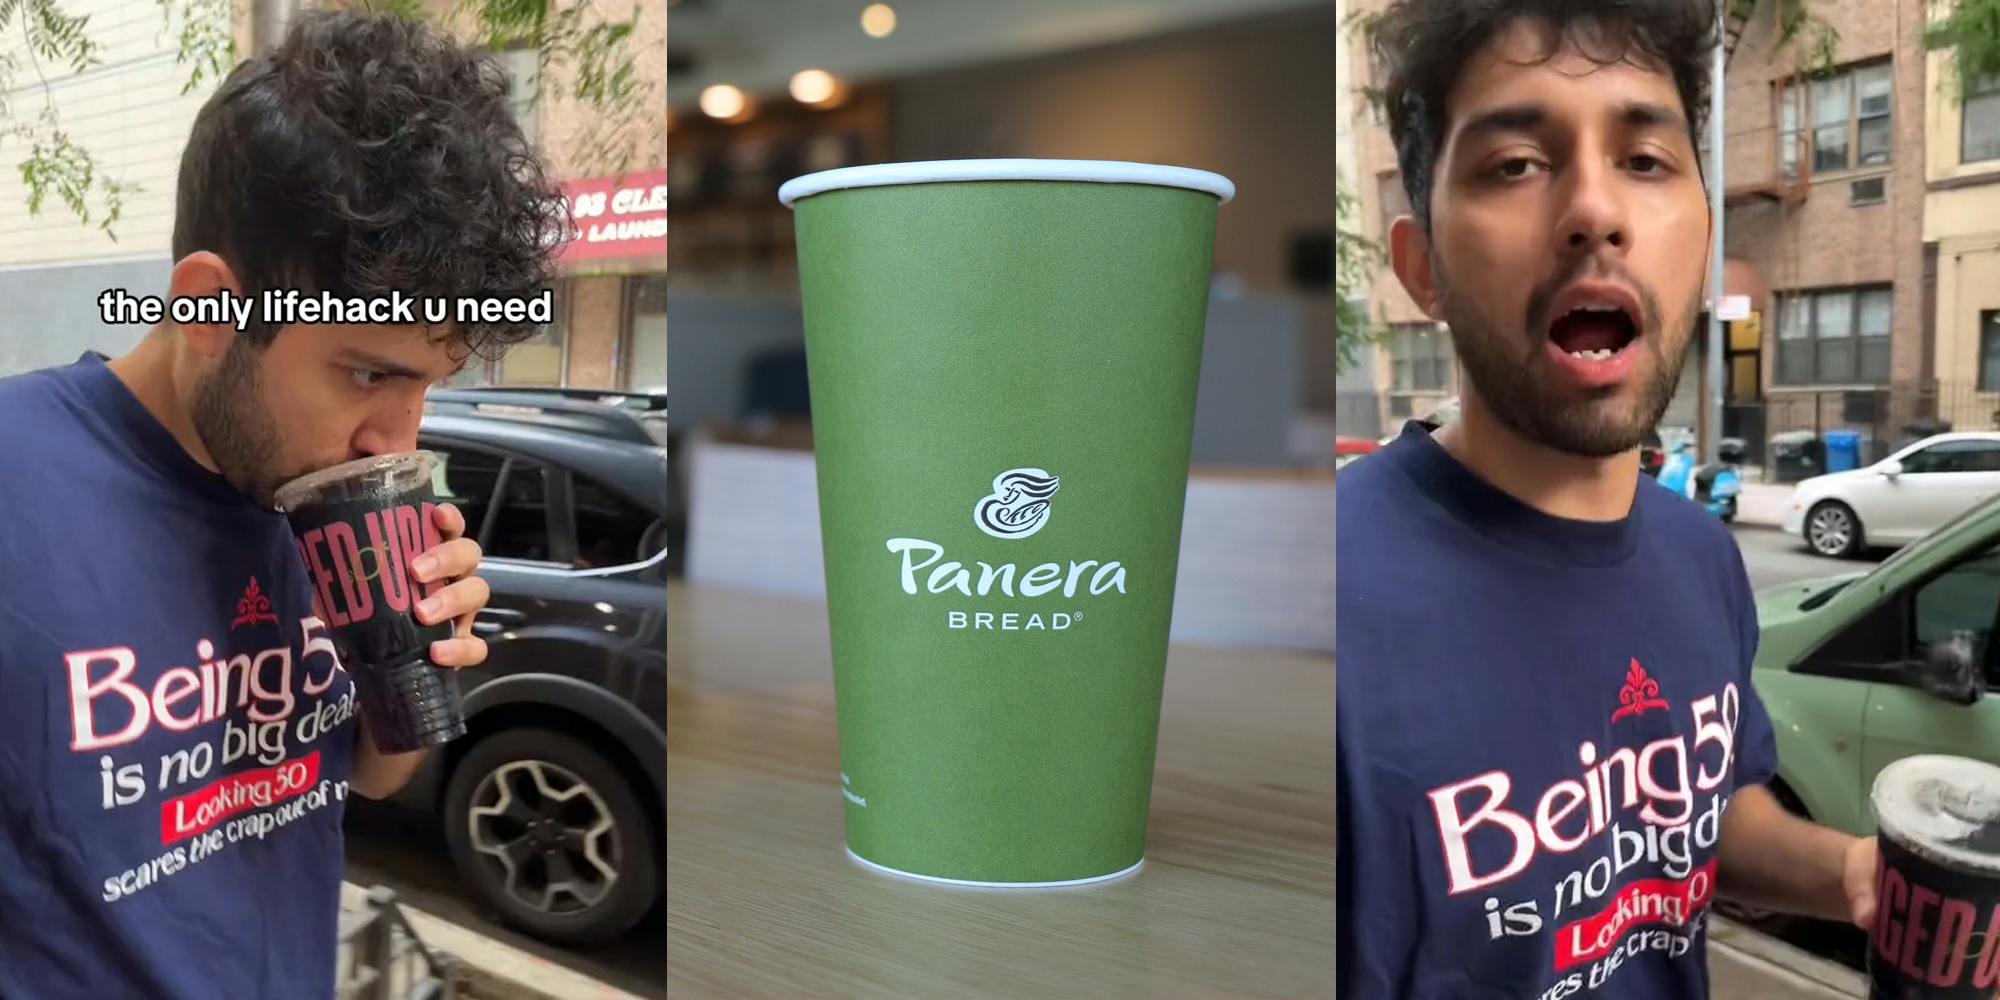 Panera's customer speaking with drink outside with caption "the only lifehack u need" (l) Panera's branded cup in restaurant (c) Panera's customer speaking with drink outside (r)